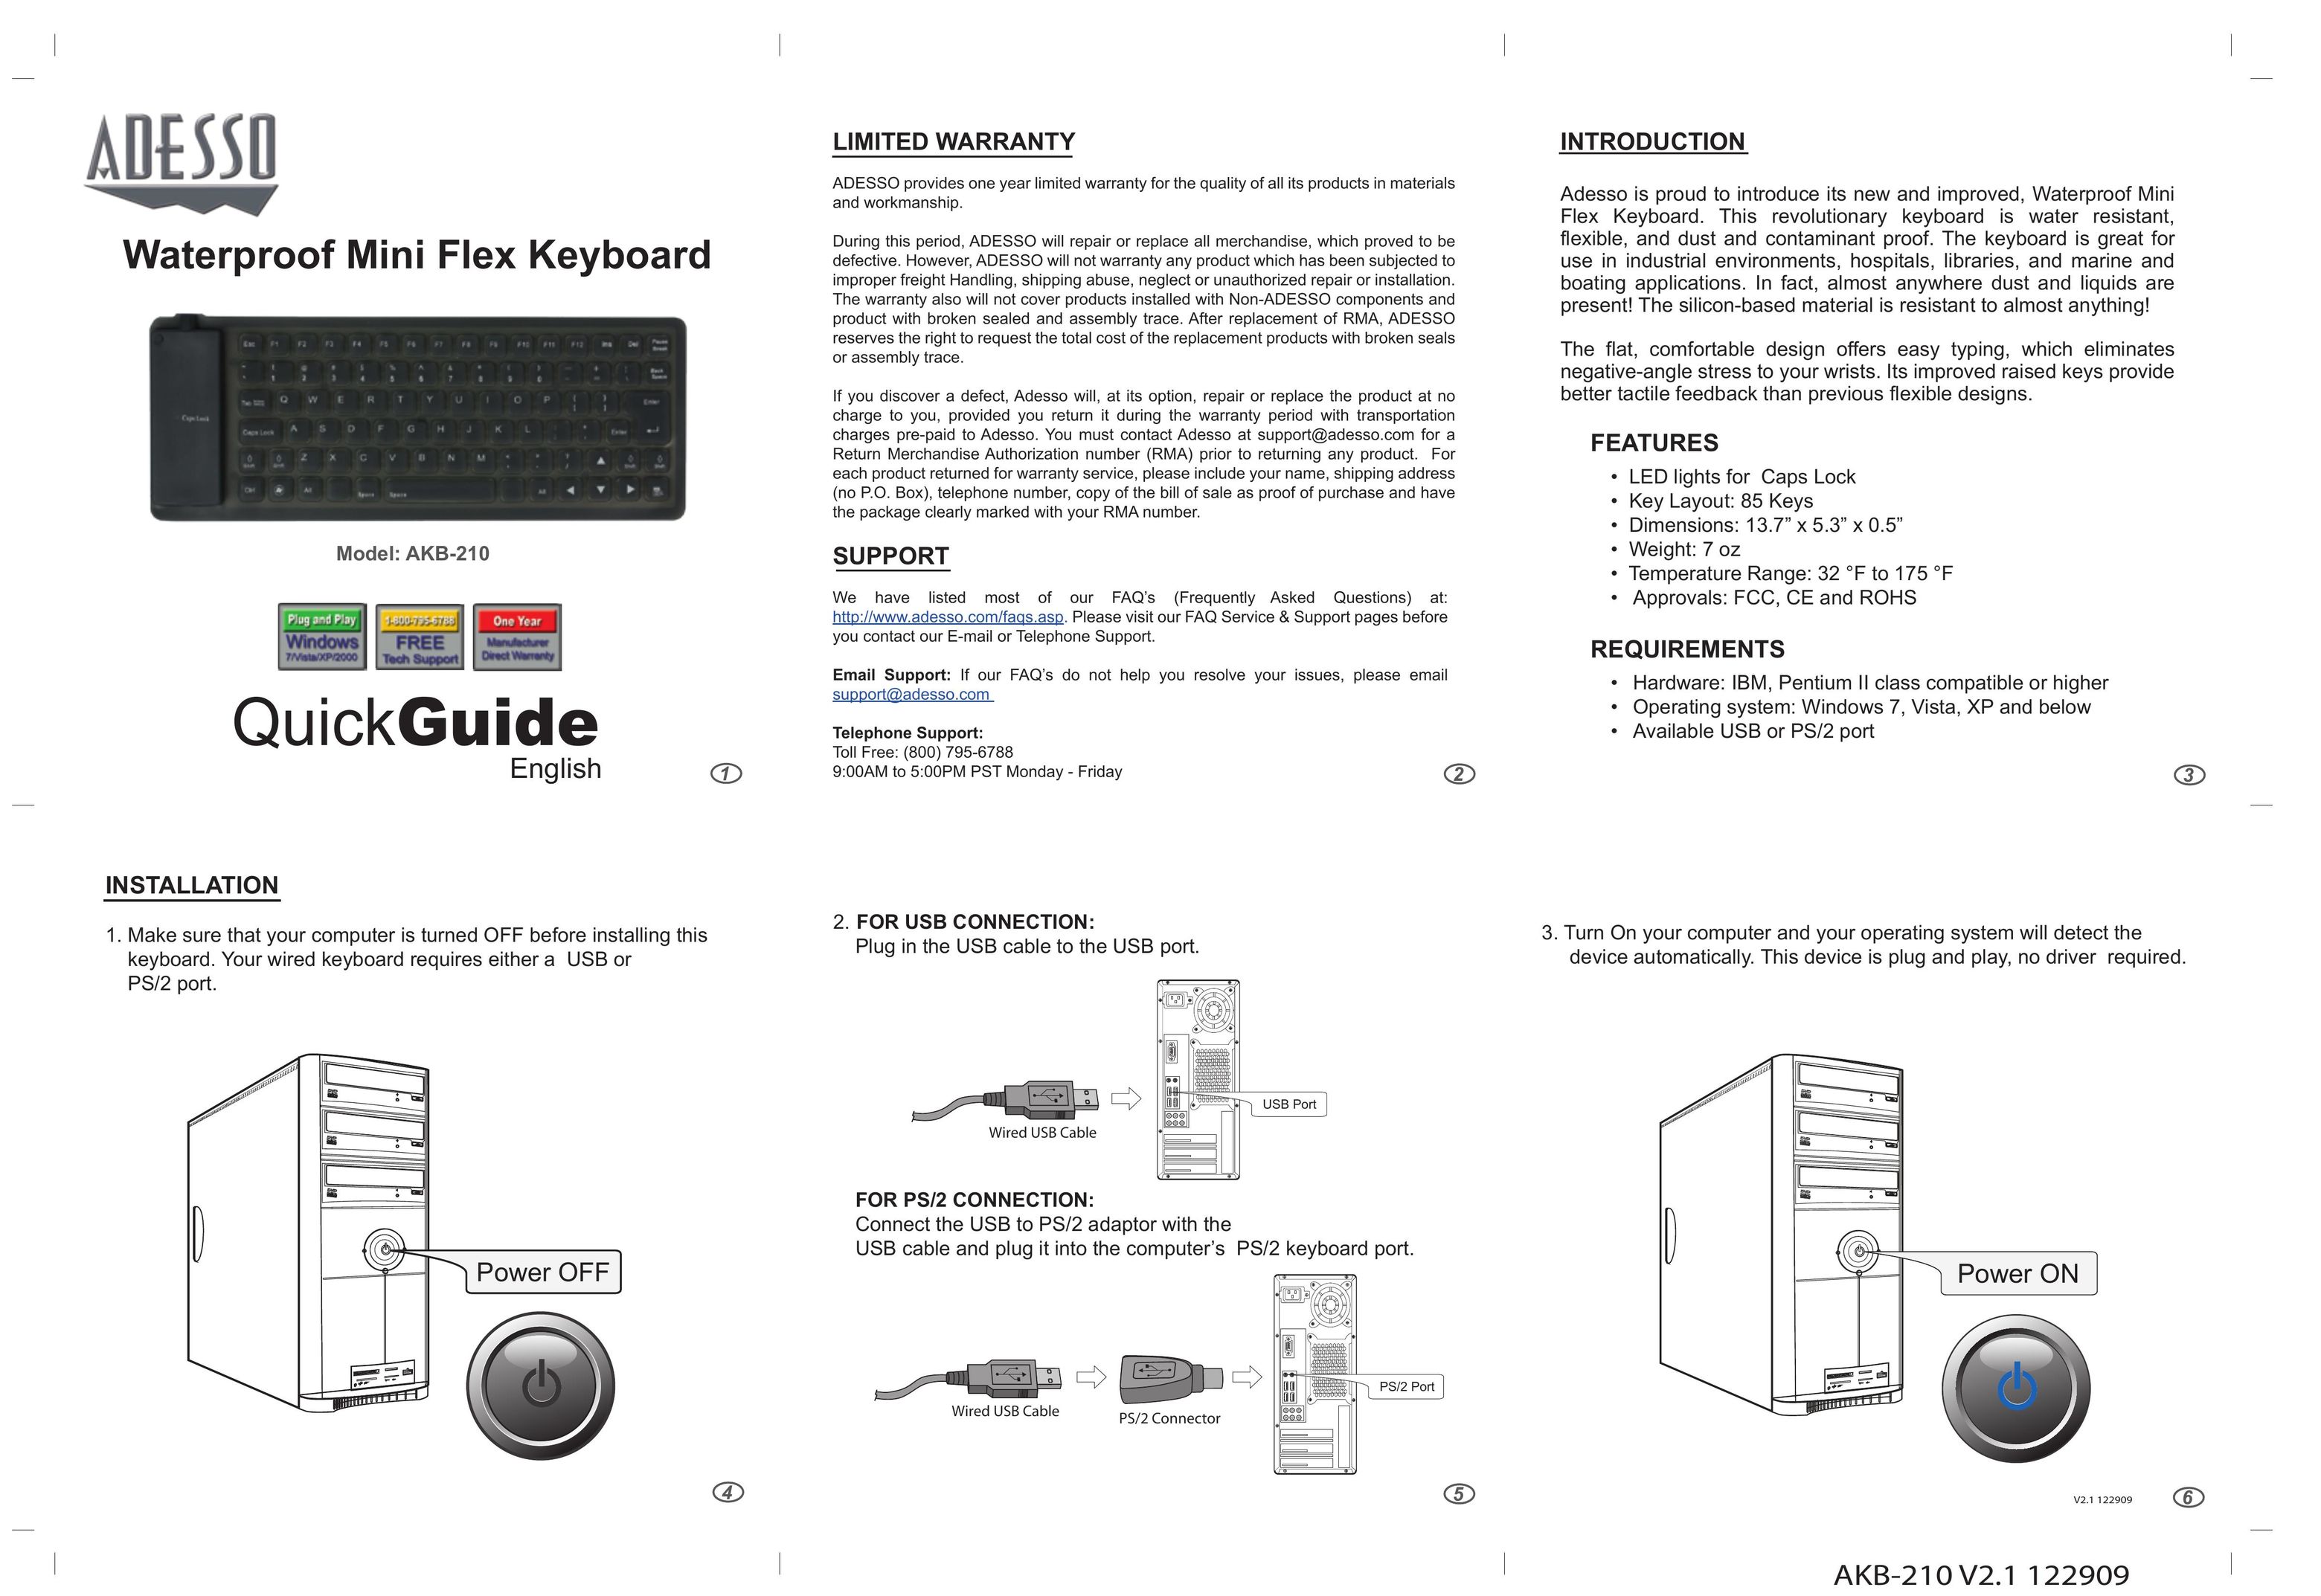 Adesso AKB-210 Mouse User Manual